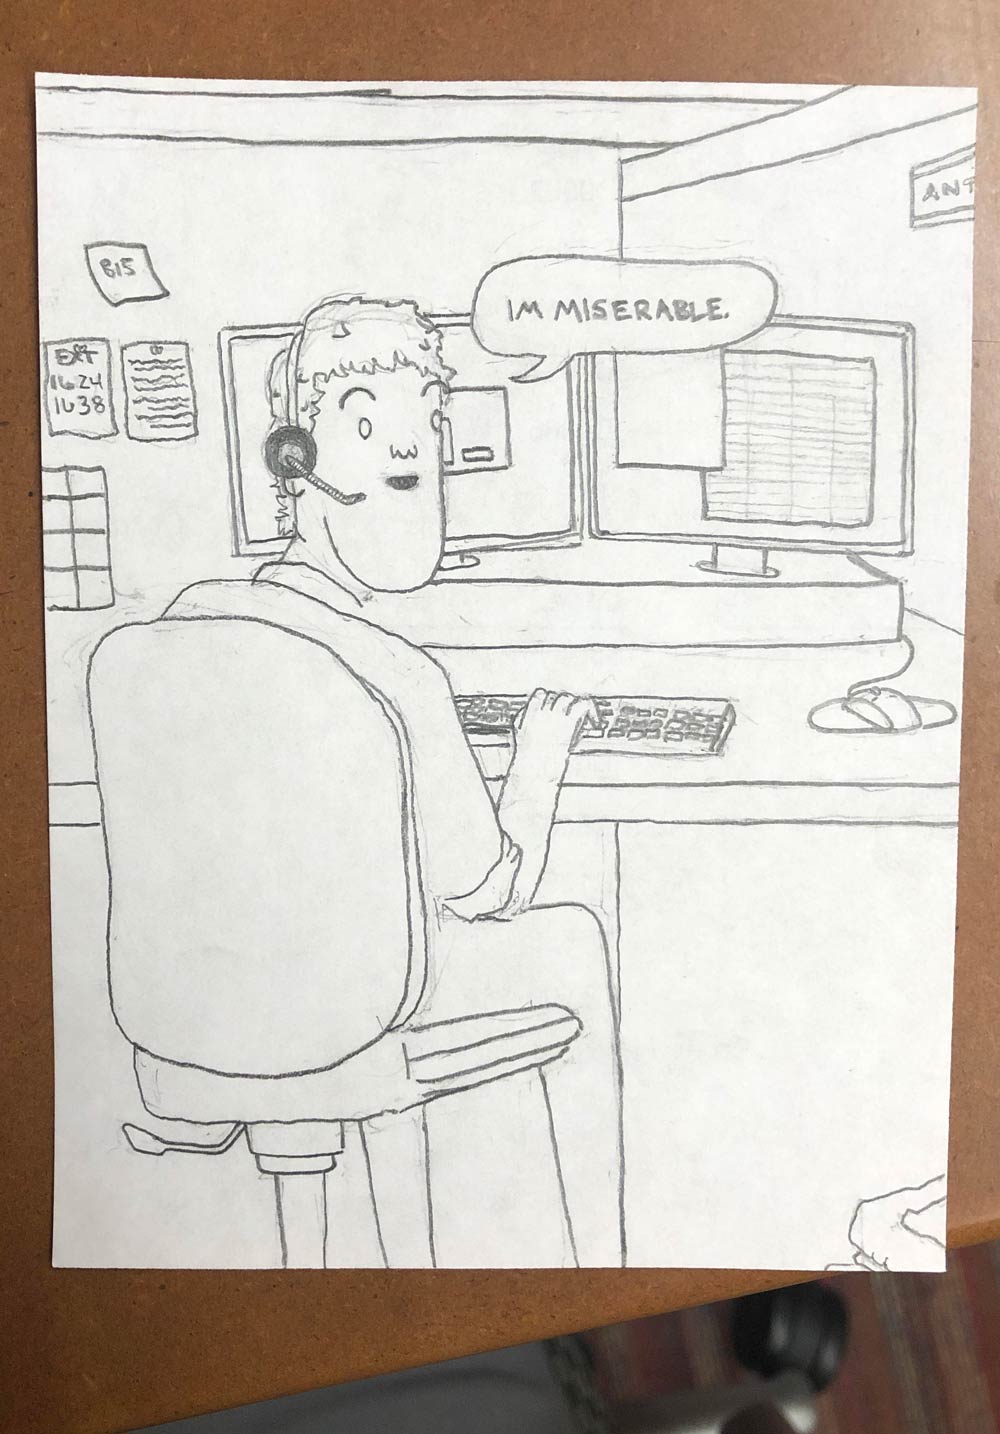 I work at a call center. Sometimes I like to draw my callers; but today I thought I’d switch it up a bit. I drew myself